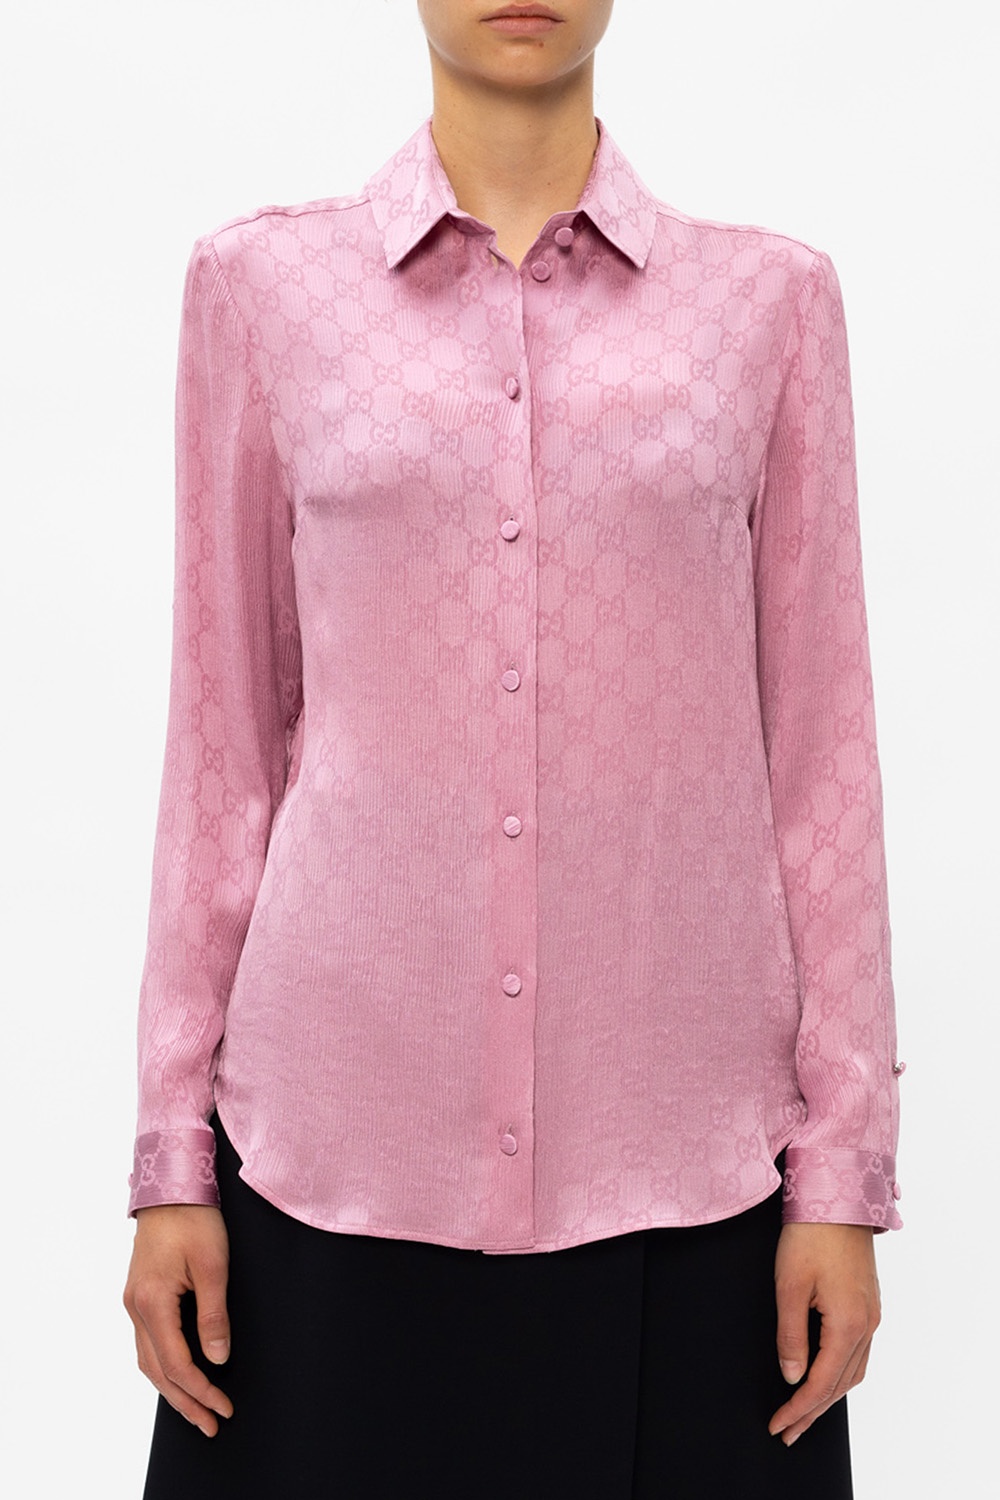 gucci women's button up